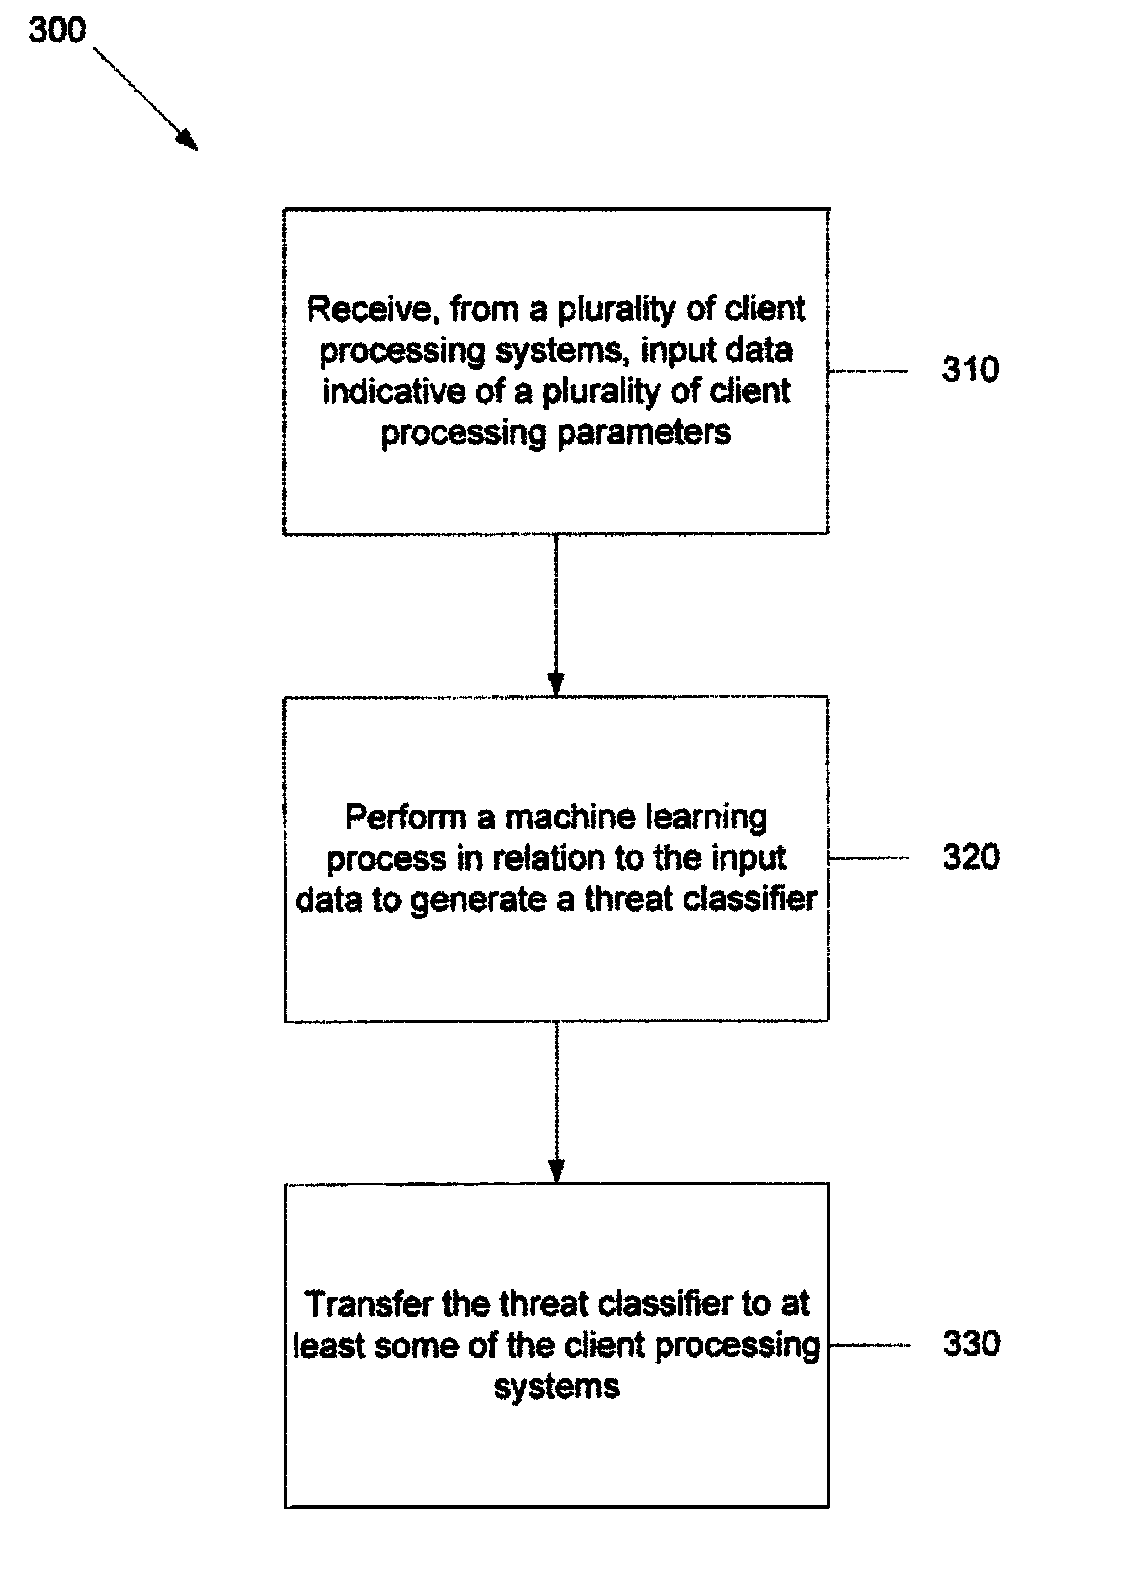 Systems and methods for generating a threat classifier to determine a malicious process